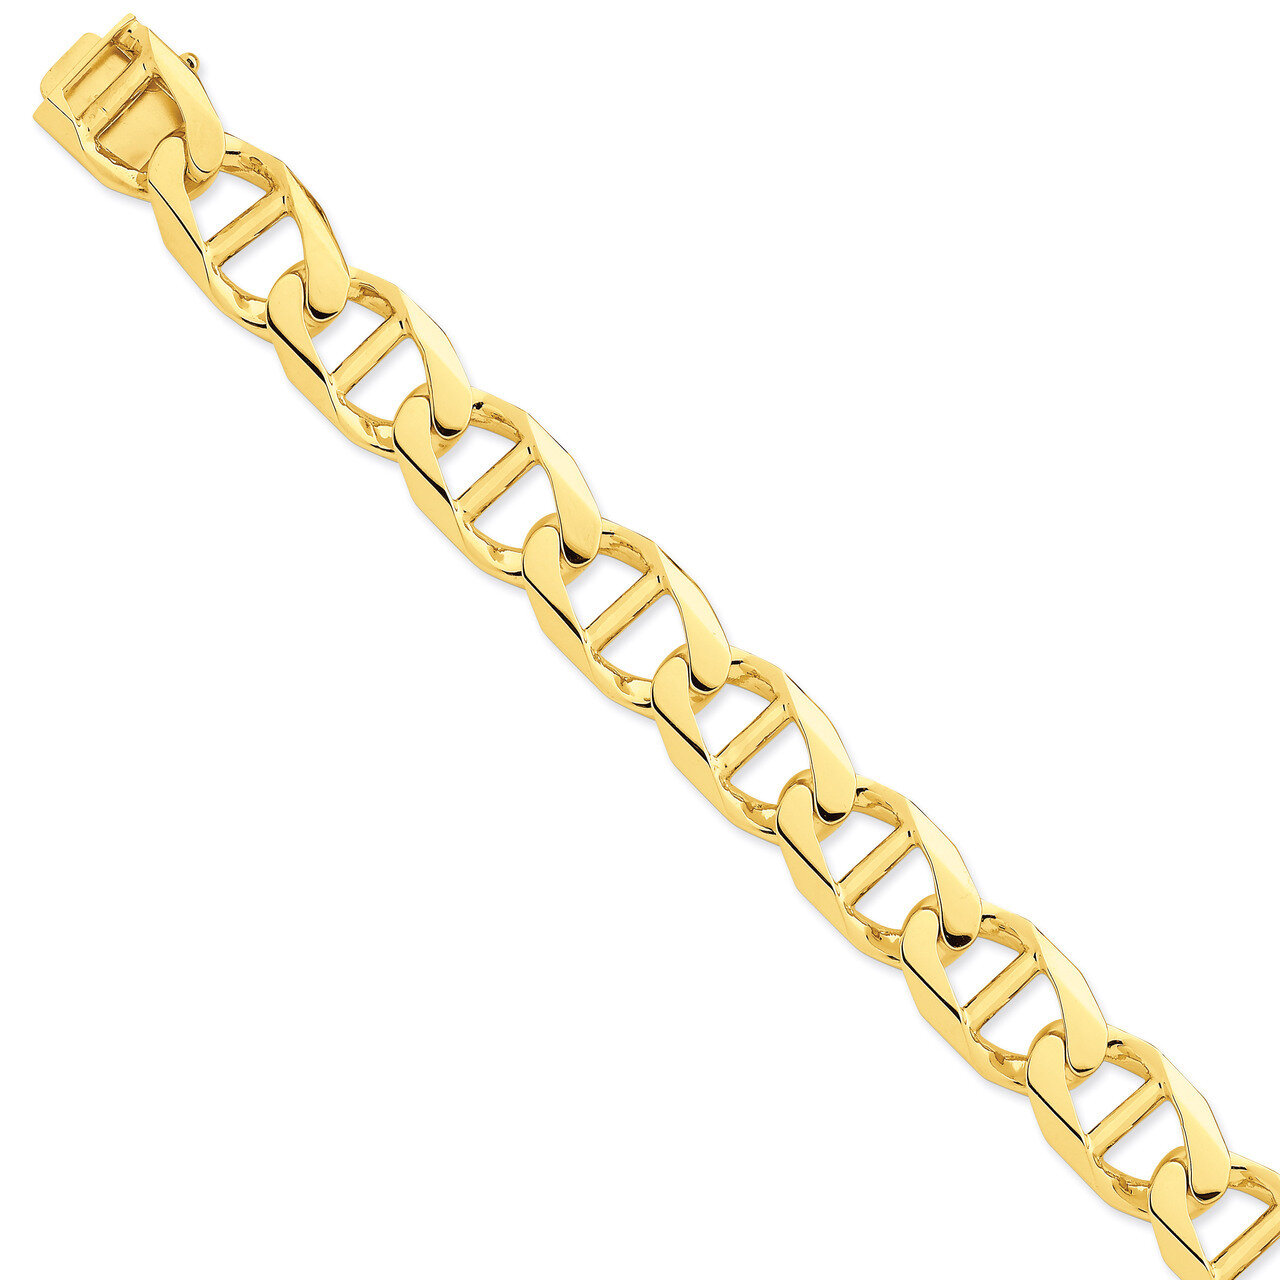 15mm Hand-Polished Anchor Link Chain 9 Inch 14k Gold LK104-9